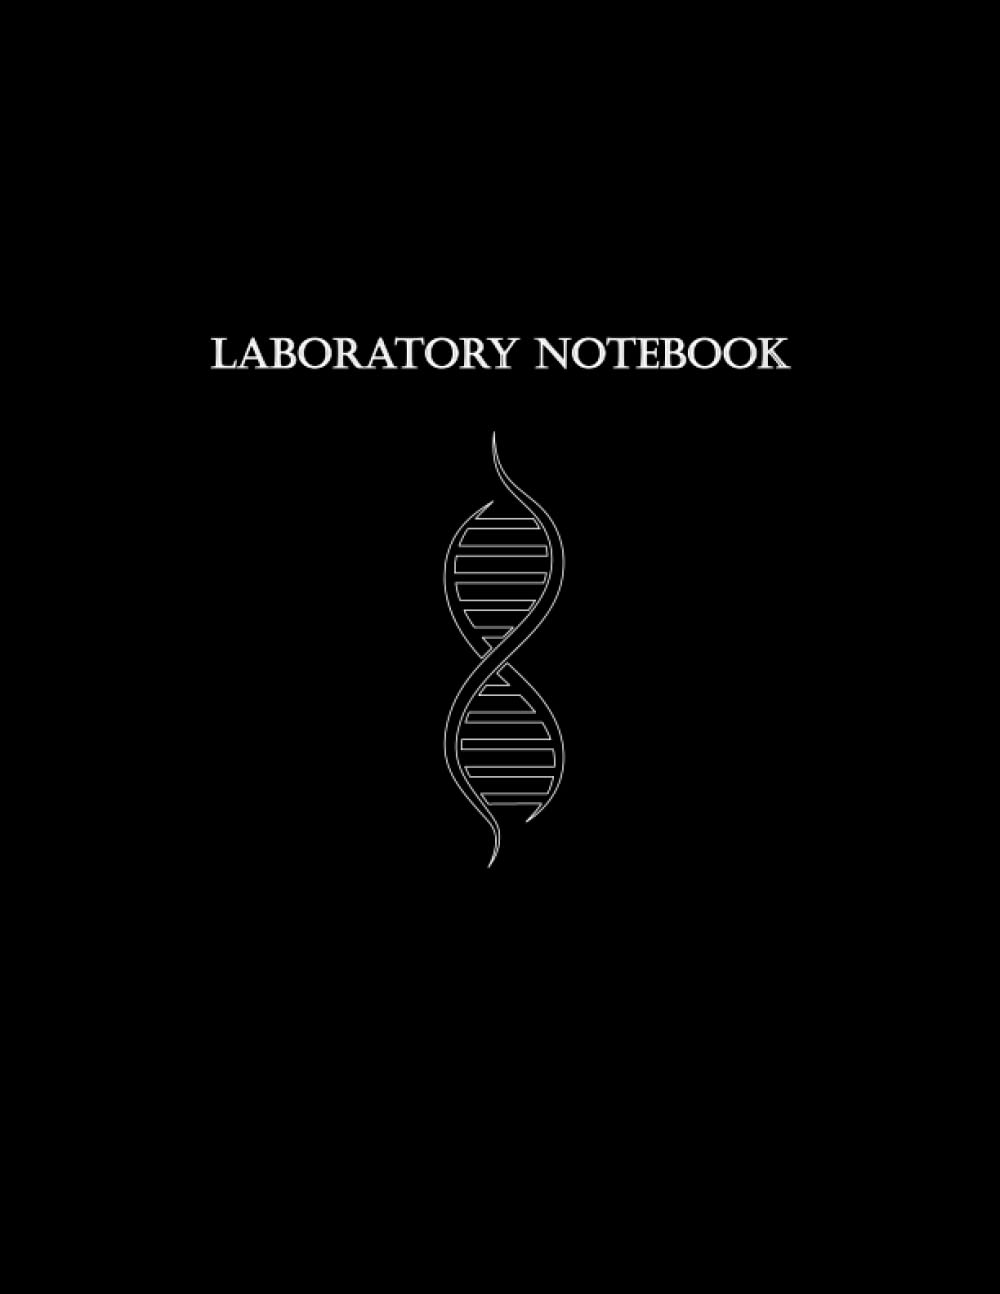 Laboratory Notebook: Bullet Lab Notebook for Highschool, College, Graduate Research, or Independent Research - 154 Pages - 8.5